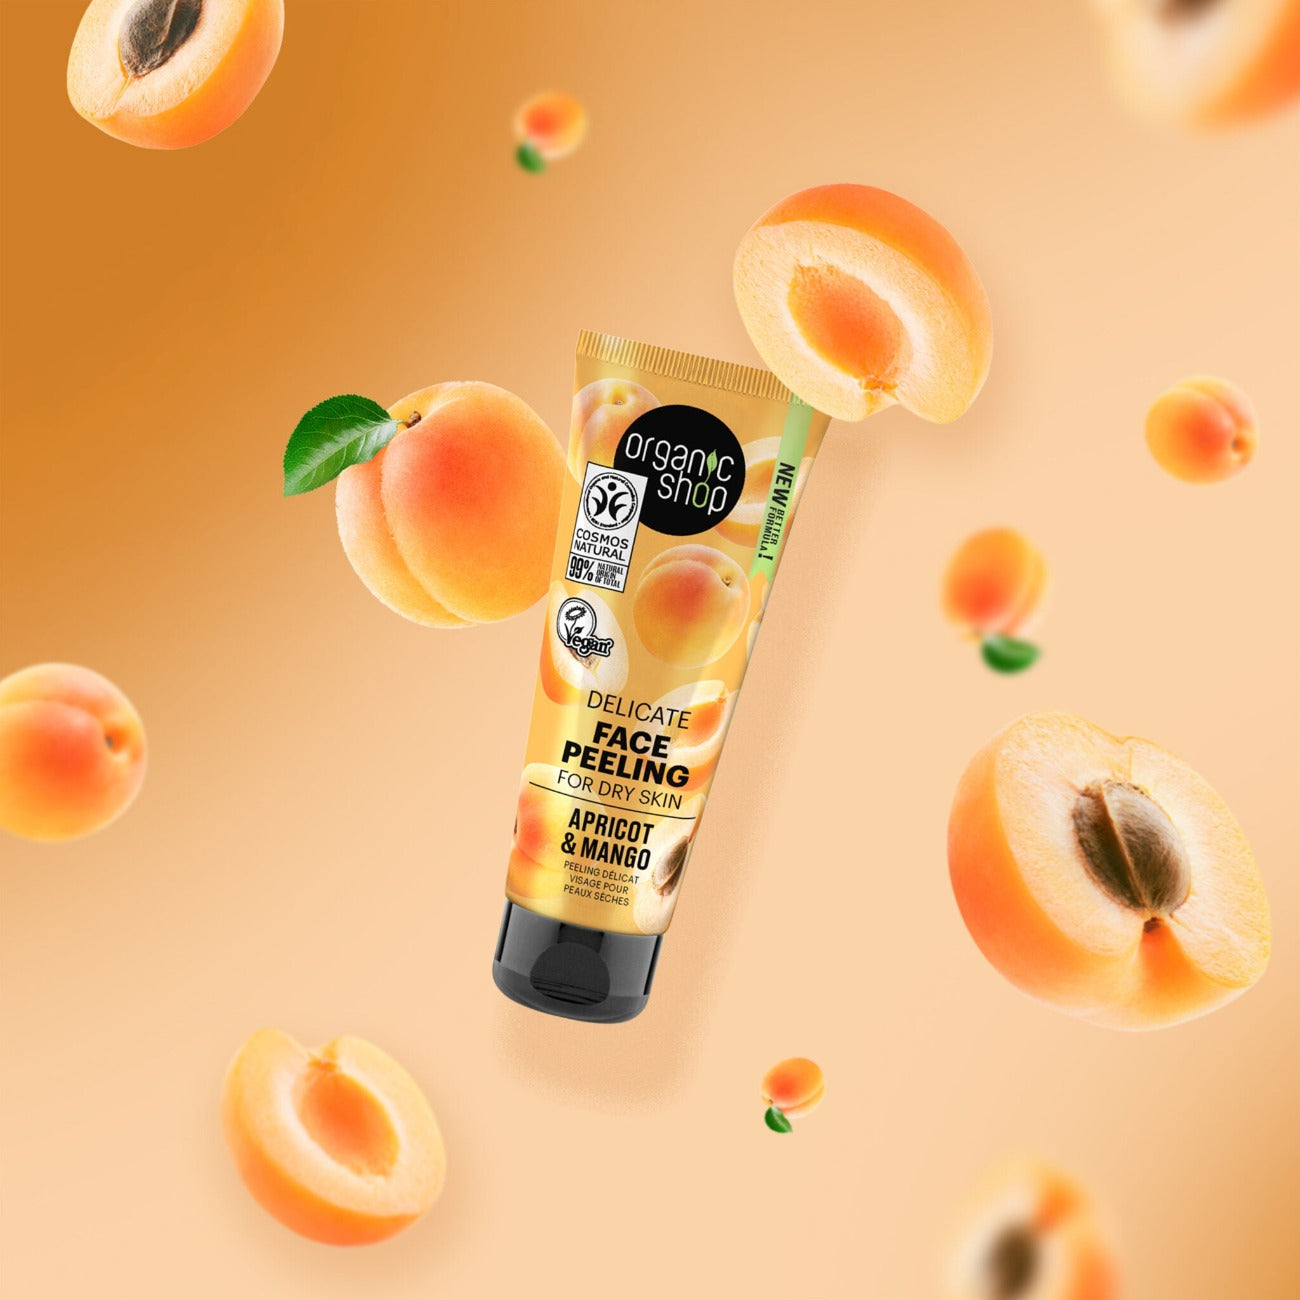 Apricot and Mango Delicate Face Peeling for Dry Skin 75ml